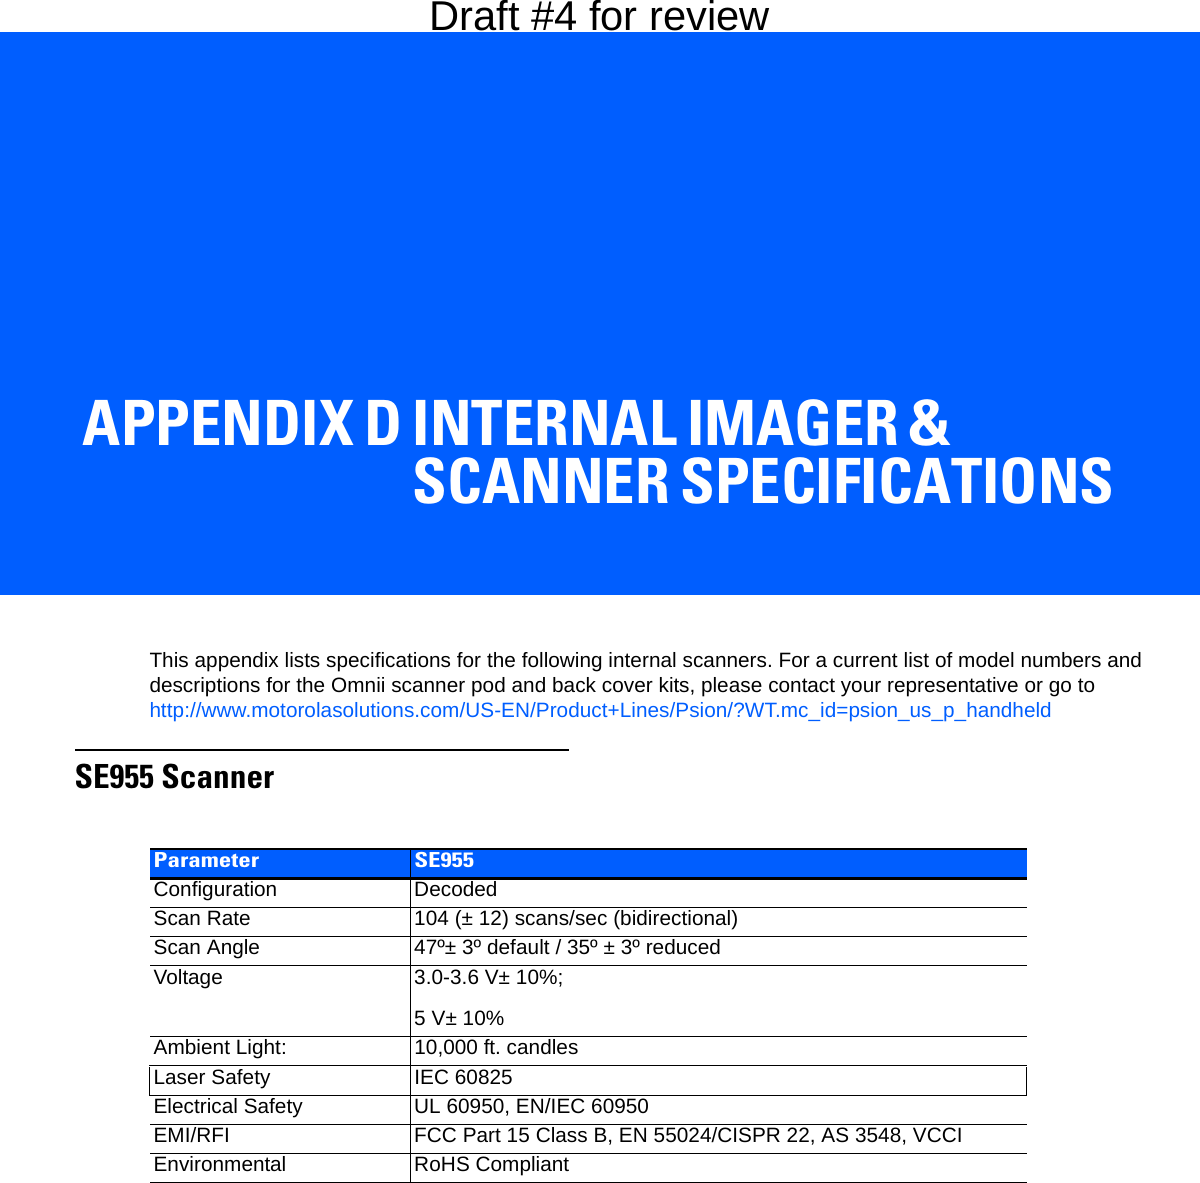 APPENDIX D INTERNAL IMAGER &amp; SCANNER SPECIFICATIONSDInternal Imager &amp; Scanner SpecificationsThis appendix lists specifications for the following internal scanners. For a current list of model numbers and descriptions for the Omnii scanner pod and back cover kits, please contact your representative or go to http://www.motorolasolutions.com/US-EN/Product+Lines/Psion/?WT.mc_id=psion_us_p_handheldSE955 ScannerParameter SE955Configuration DecodedScan Rate 104 (± 12) scans/sec (bidirectional)Scan Angle 47º± 3º default / 35º ± 3º reducedVoltage 3.0-3.6 V± 10%;5 V± 10%Ambient Light: 10,000 ft. candlesLaser Safety IEC 60825Electrical Safety UL 60950, EN/IEC 60950EMI/RFI FCC Part 15 Class B, EN 55024/CISPR 22, AS 3548, VCCIEnvironmental RoHS CompliantDraft #4 for review